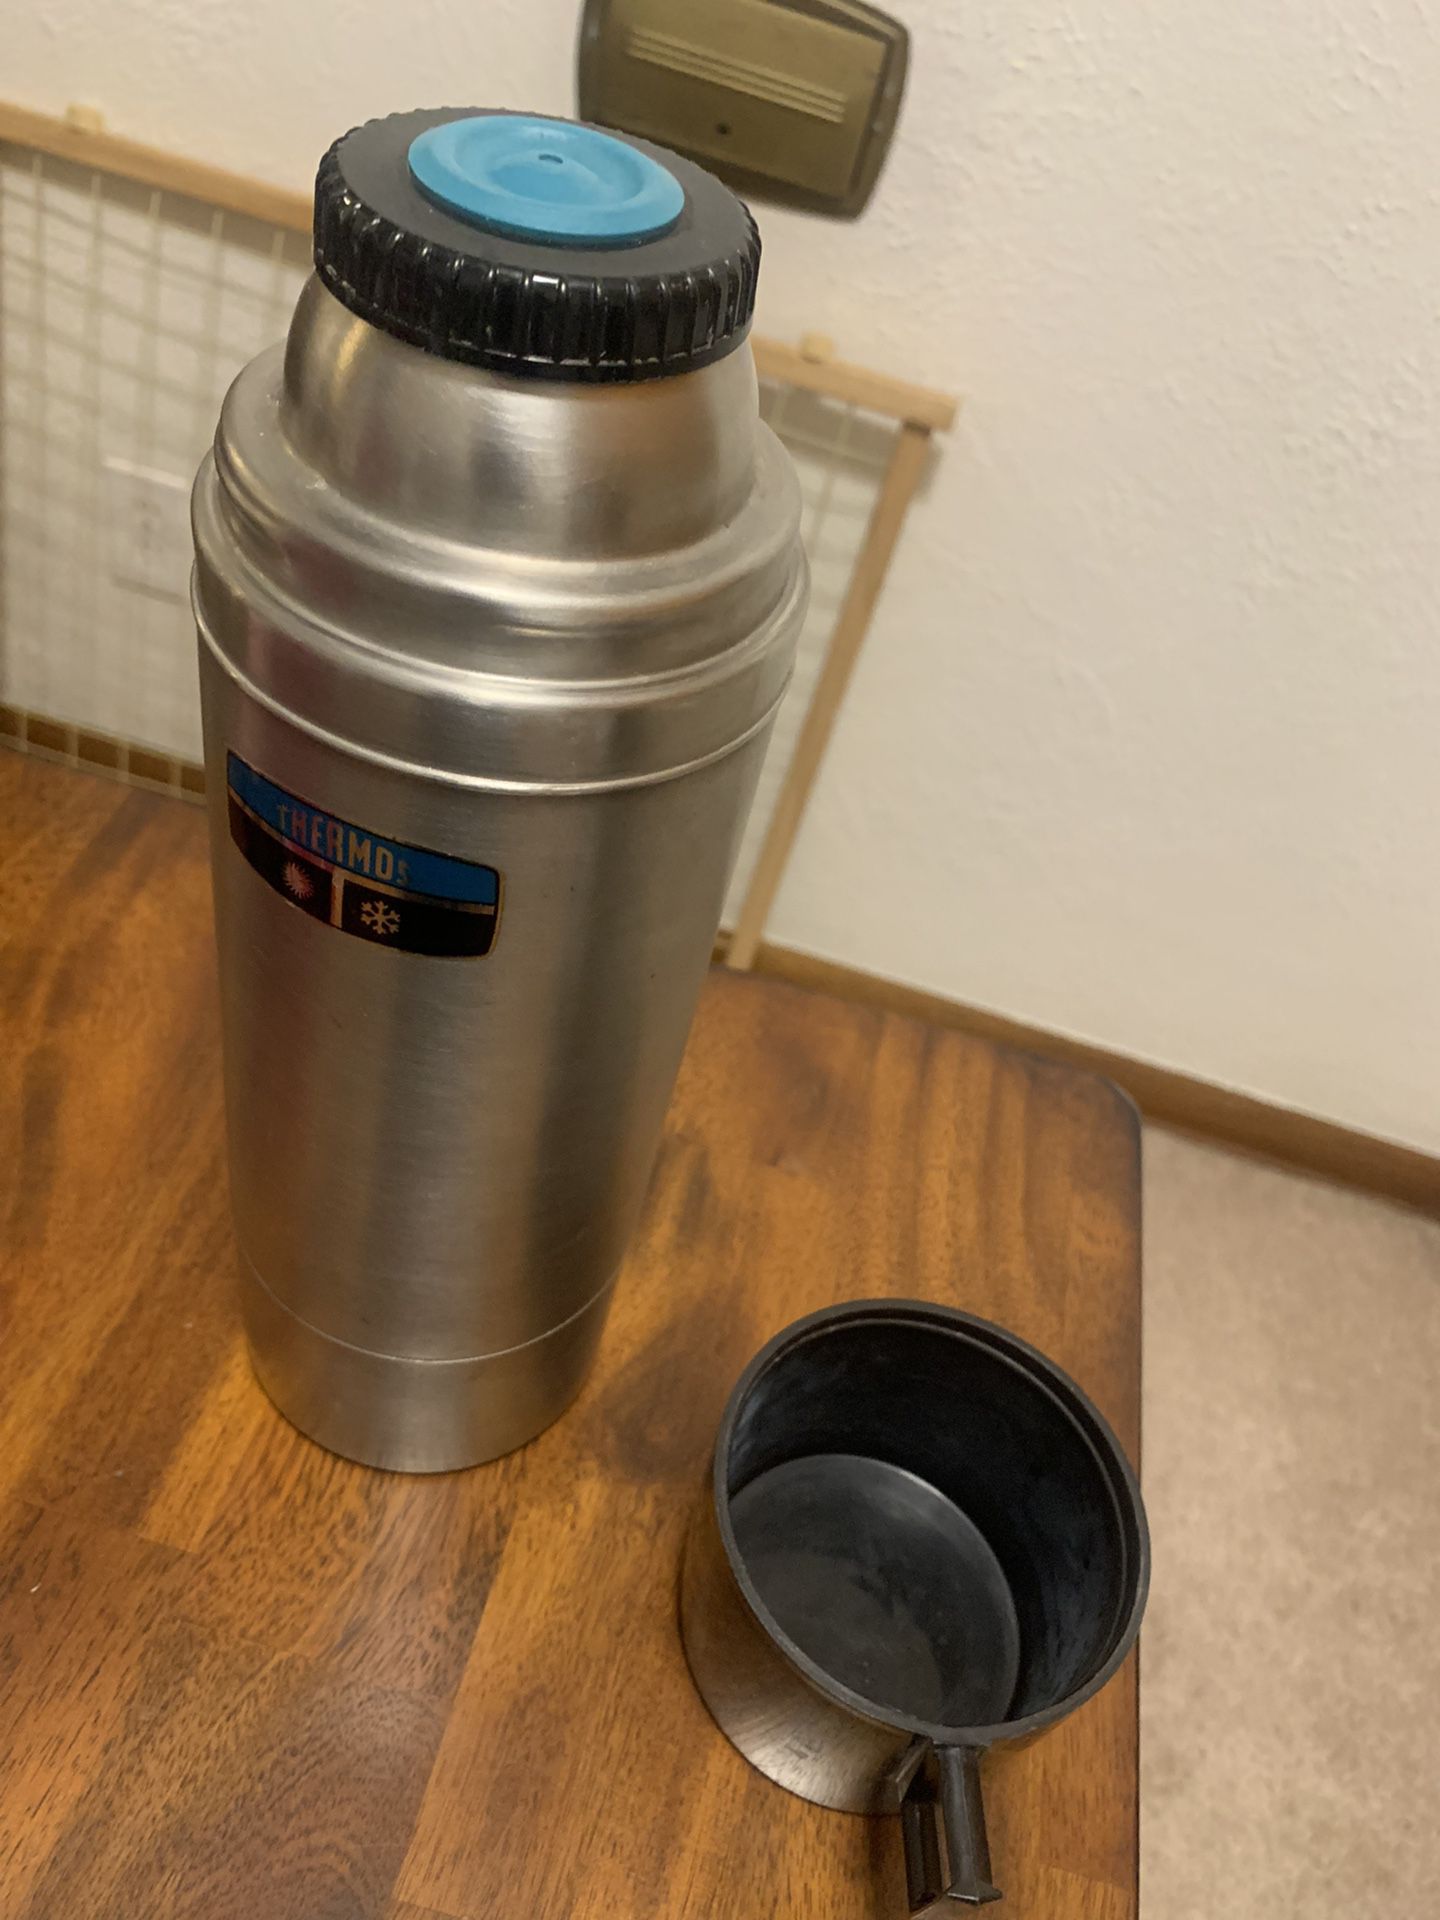 New Stanley Classic Bull Logo Thermos Stainless Steel Made In USA One Quart  for Sale in Puyallup, WA - OfferUp